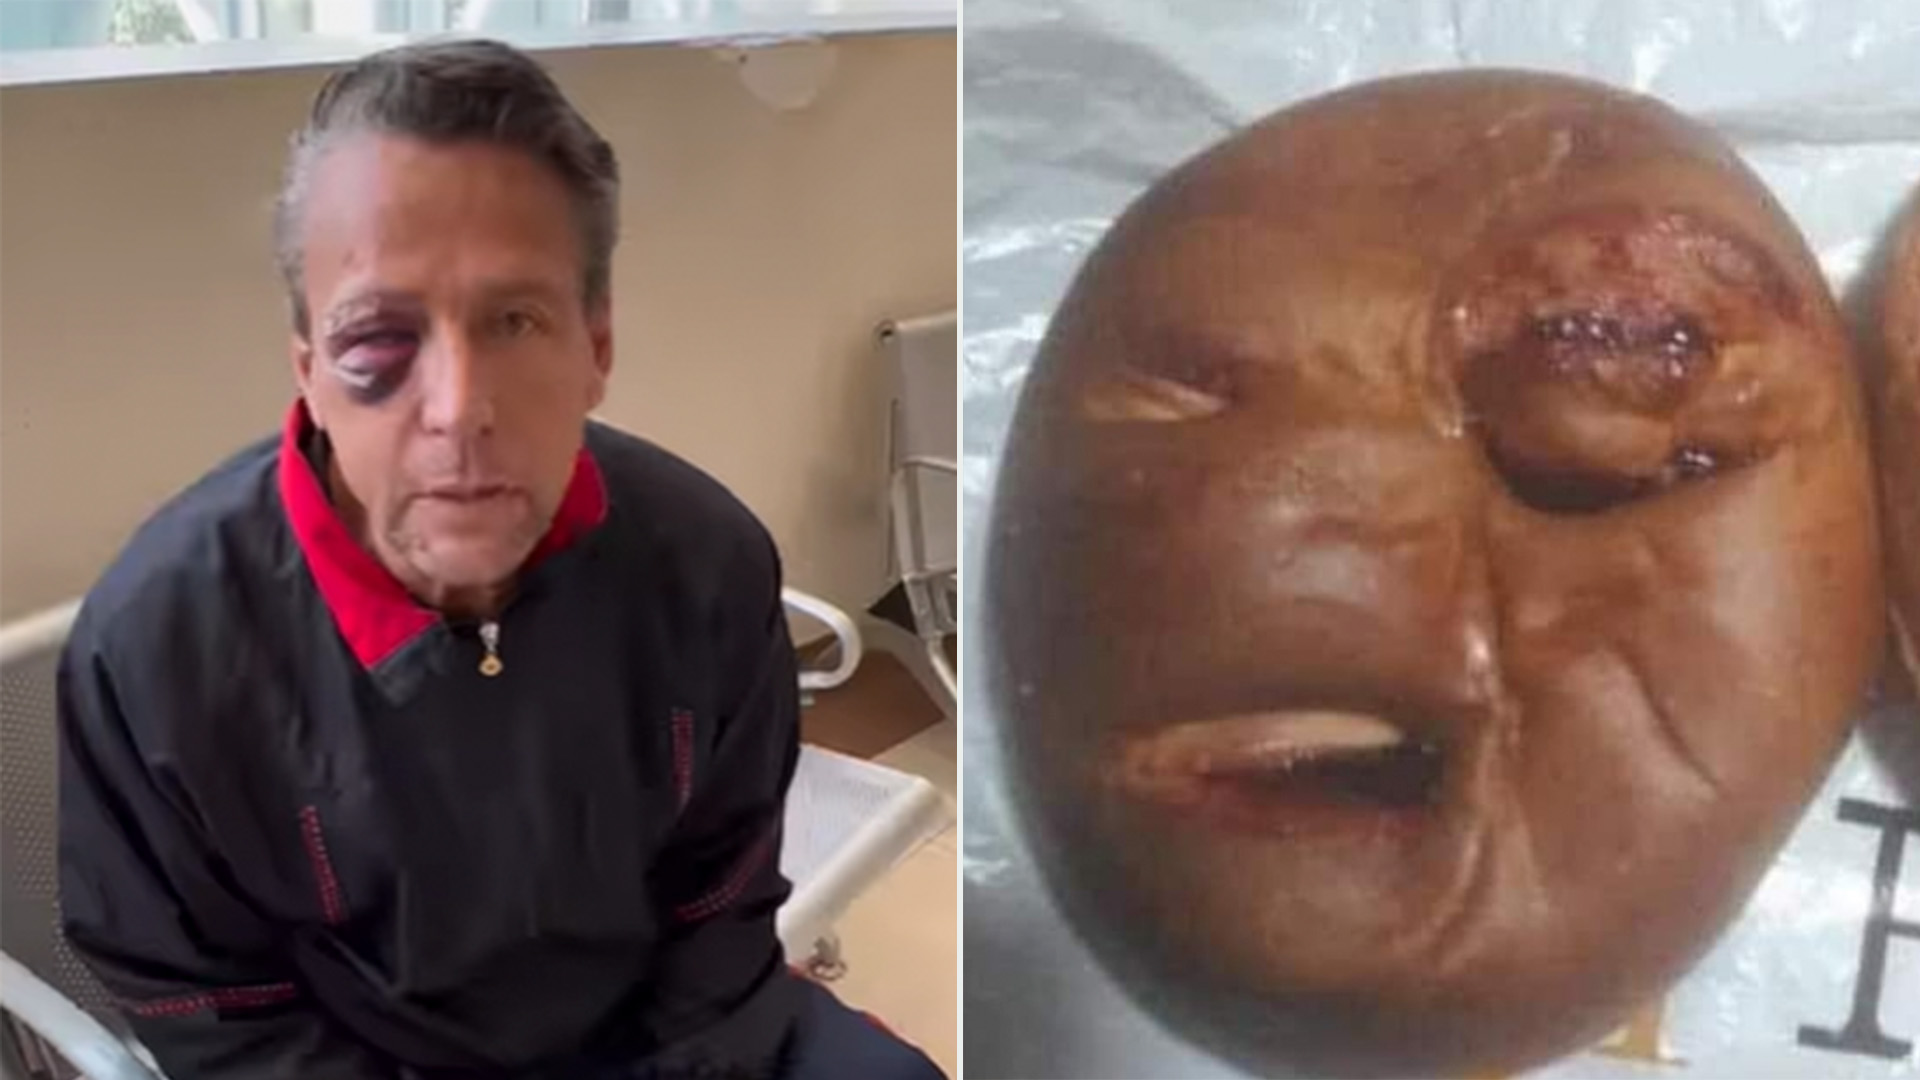 The creators of this viral dessert made the bread look like the former host's swollen face "today" Credit: (Instagram/@adamereacciona and Facebook/clubdecochis)